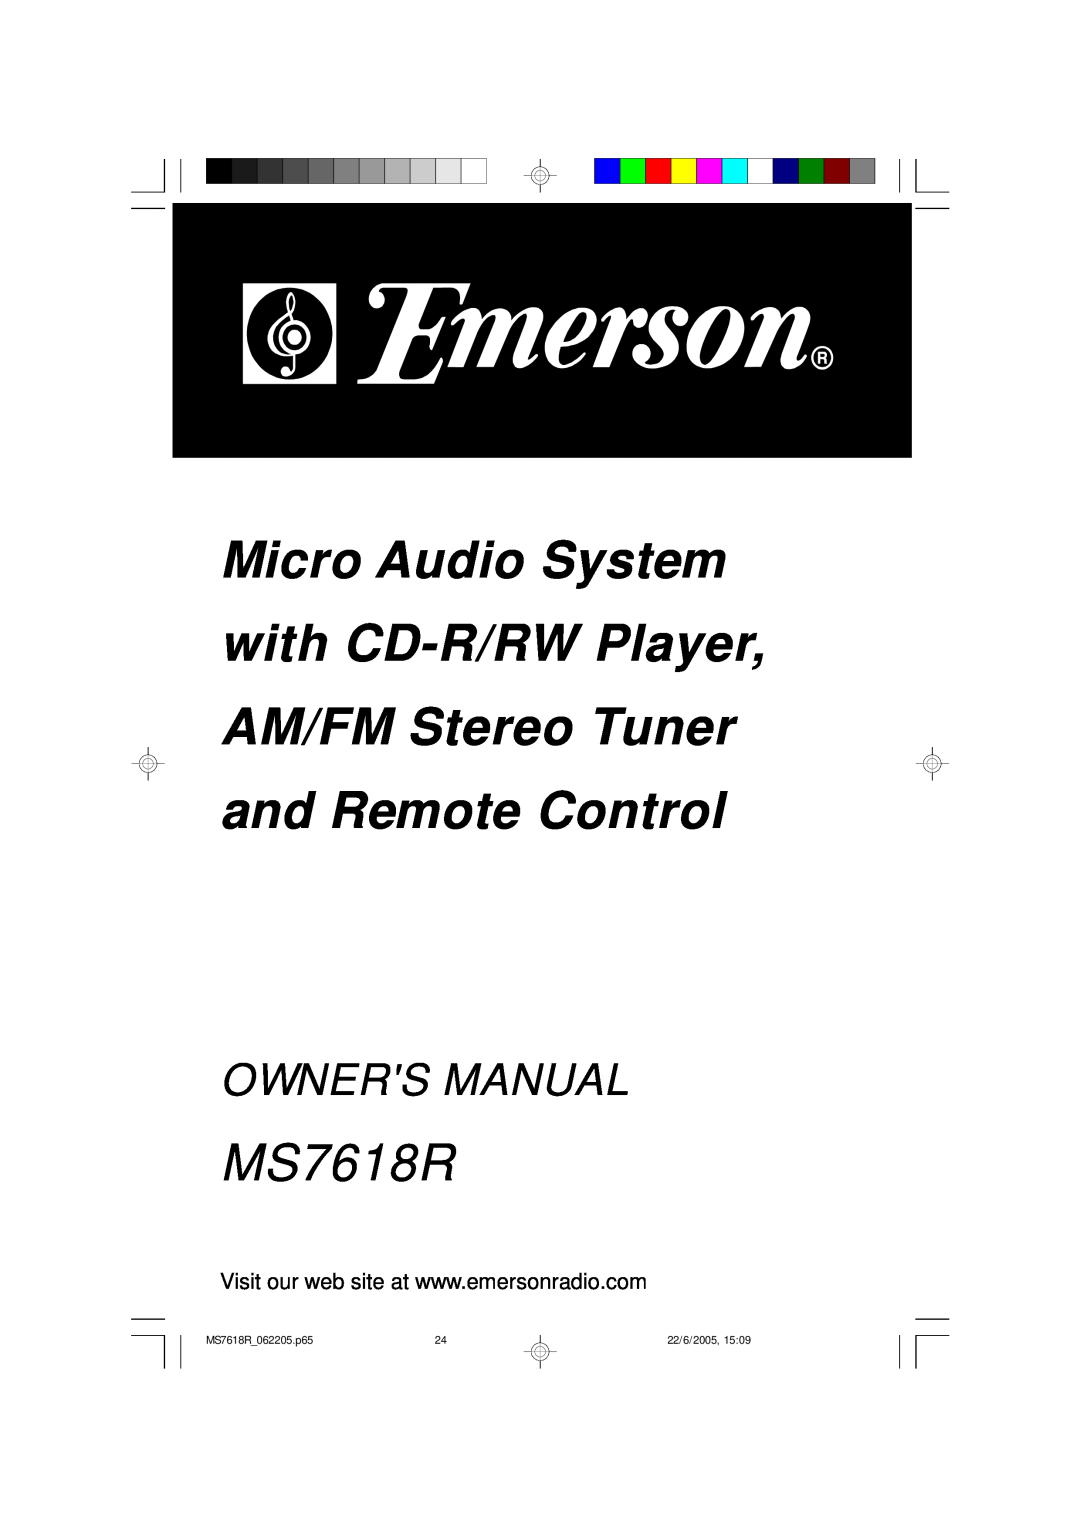 Emerson MS7618R owner manual Micro Audio System with CD-R/RWPlayer, AM/FM Stereo Tuner and Remote Control, 22/6/2005 